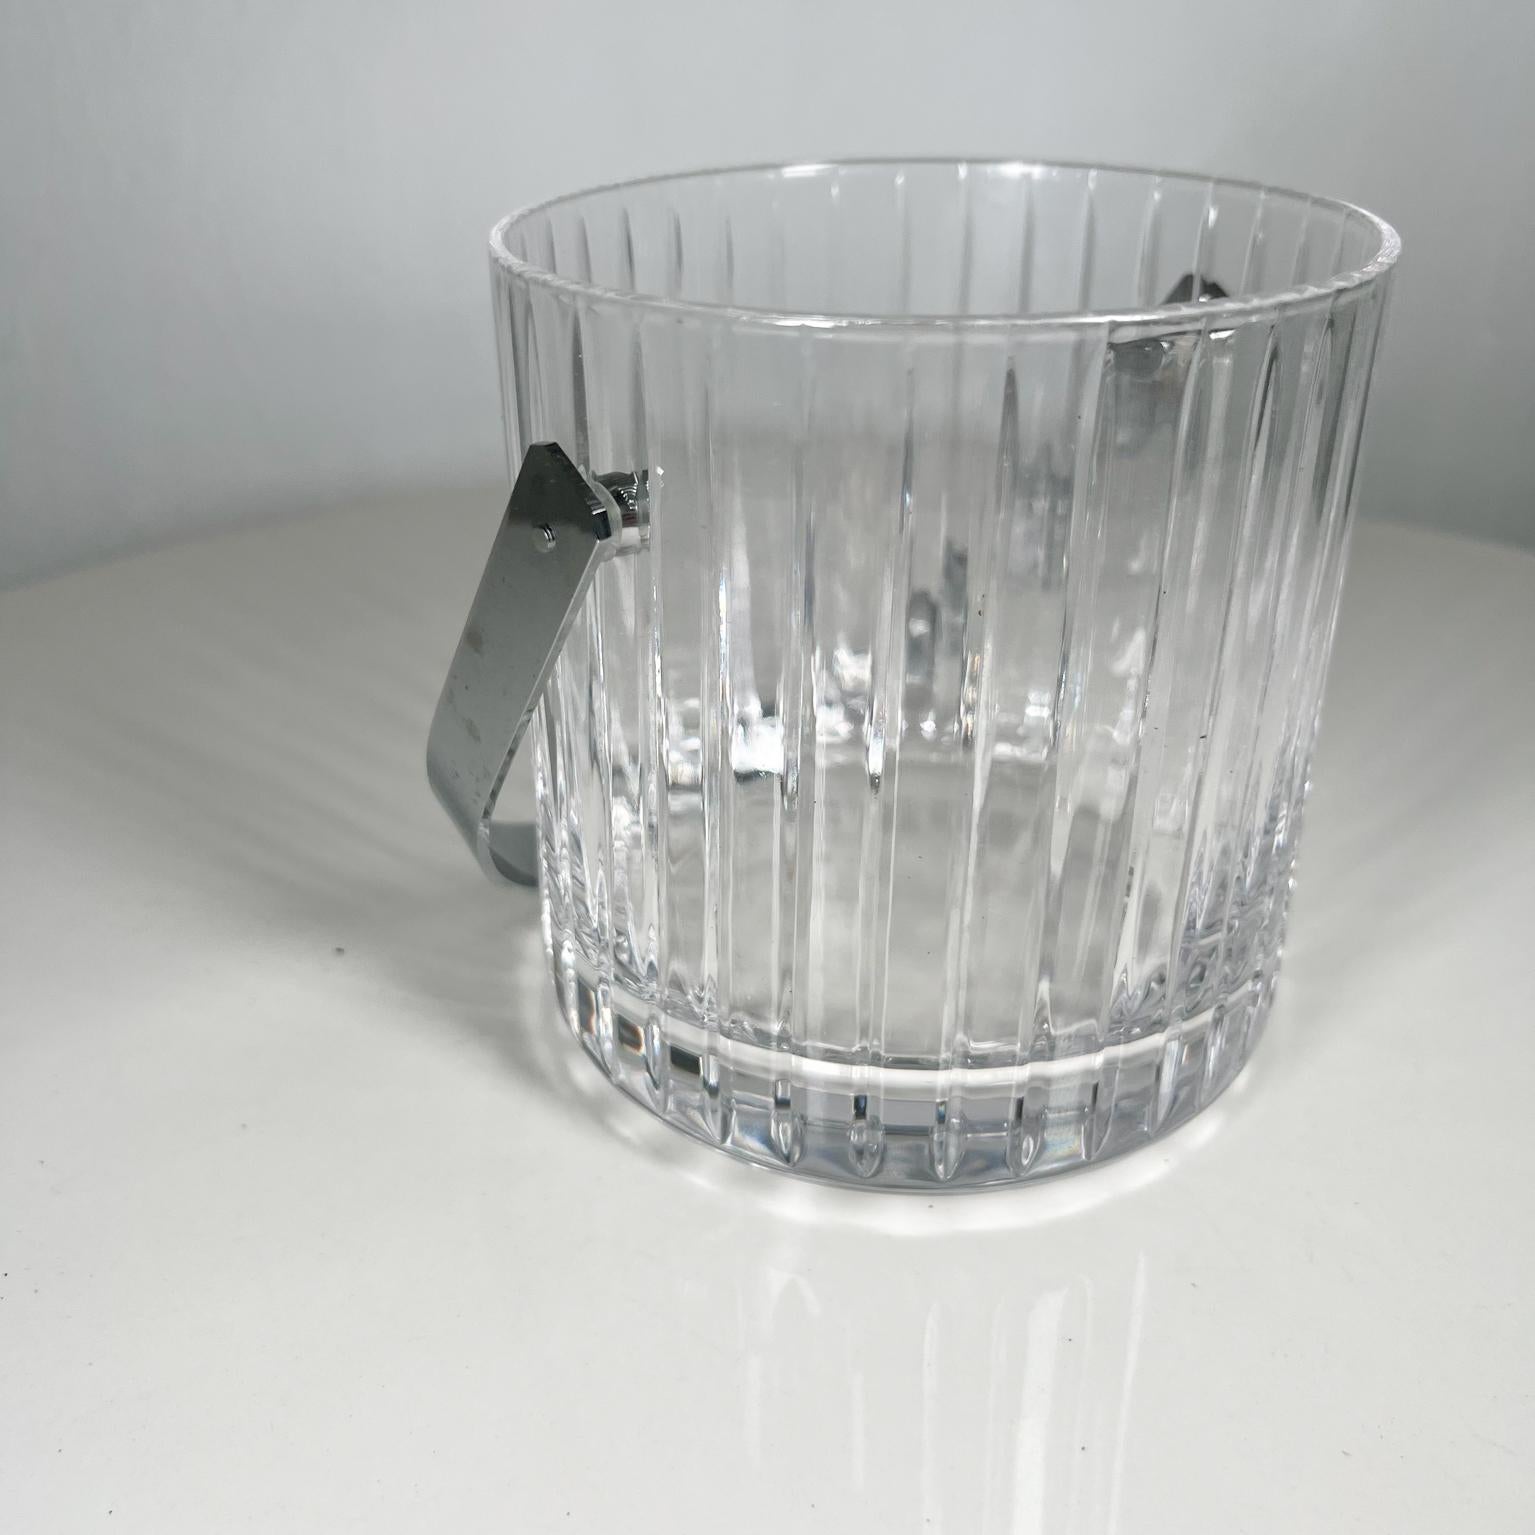 1960s Modernist Ribbed Crystal Glass Ice Bucket from Italy For Sale 3